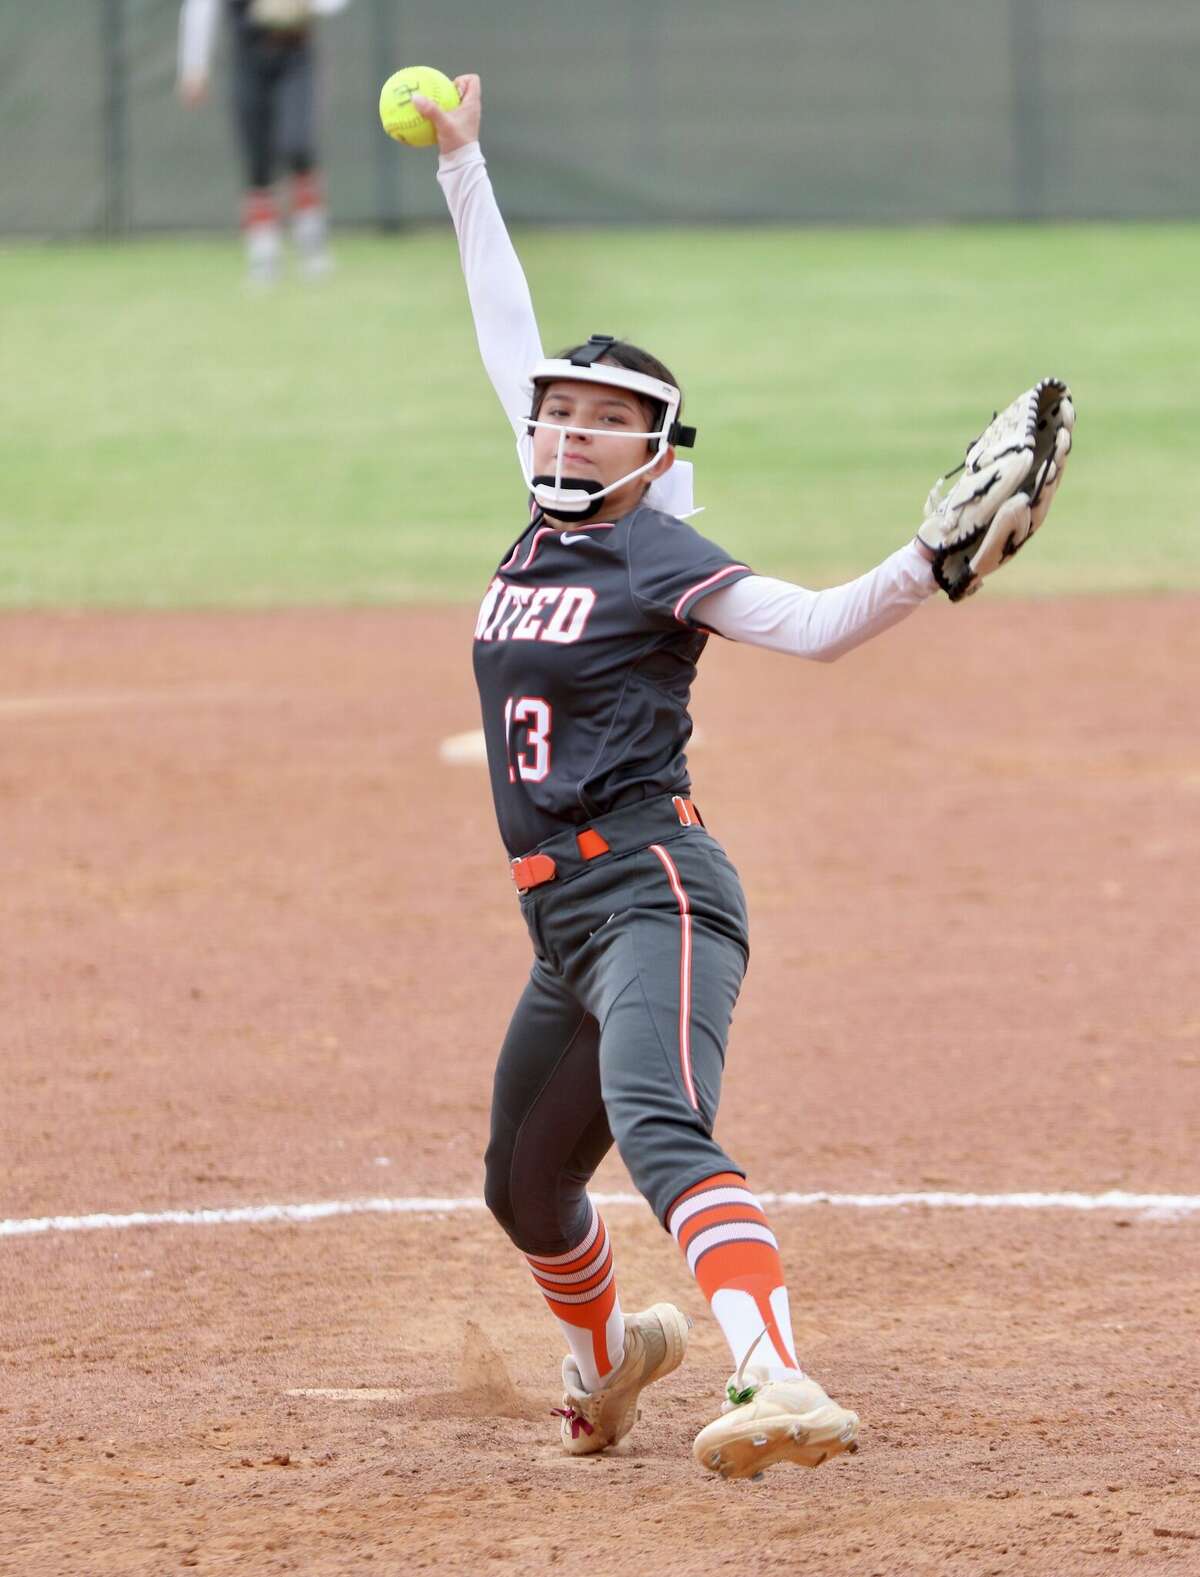 The United Lady Longhorns will face the Alexander Lady Bulldogs on Tuesday.